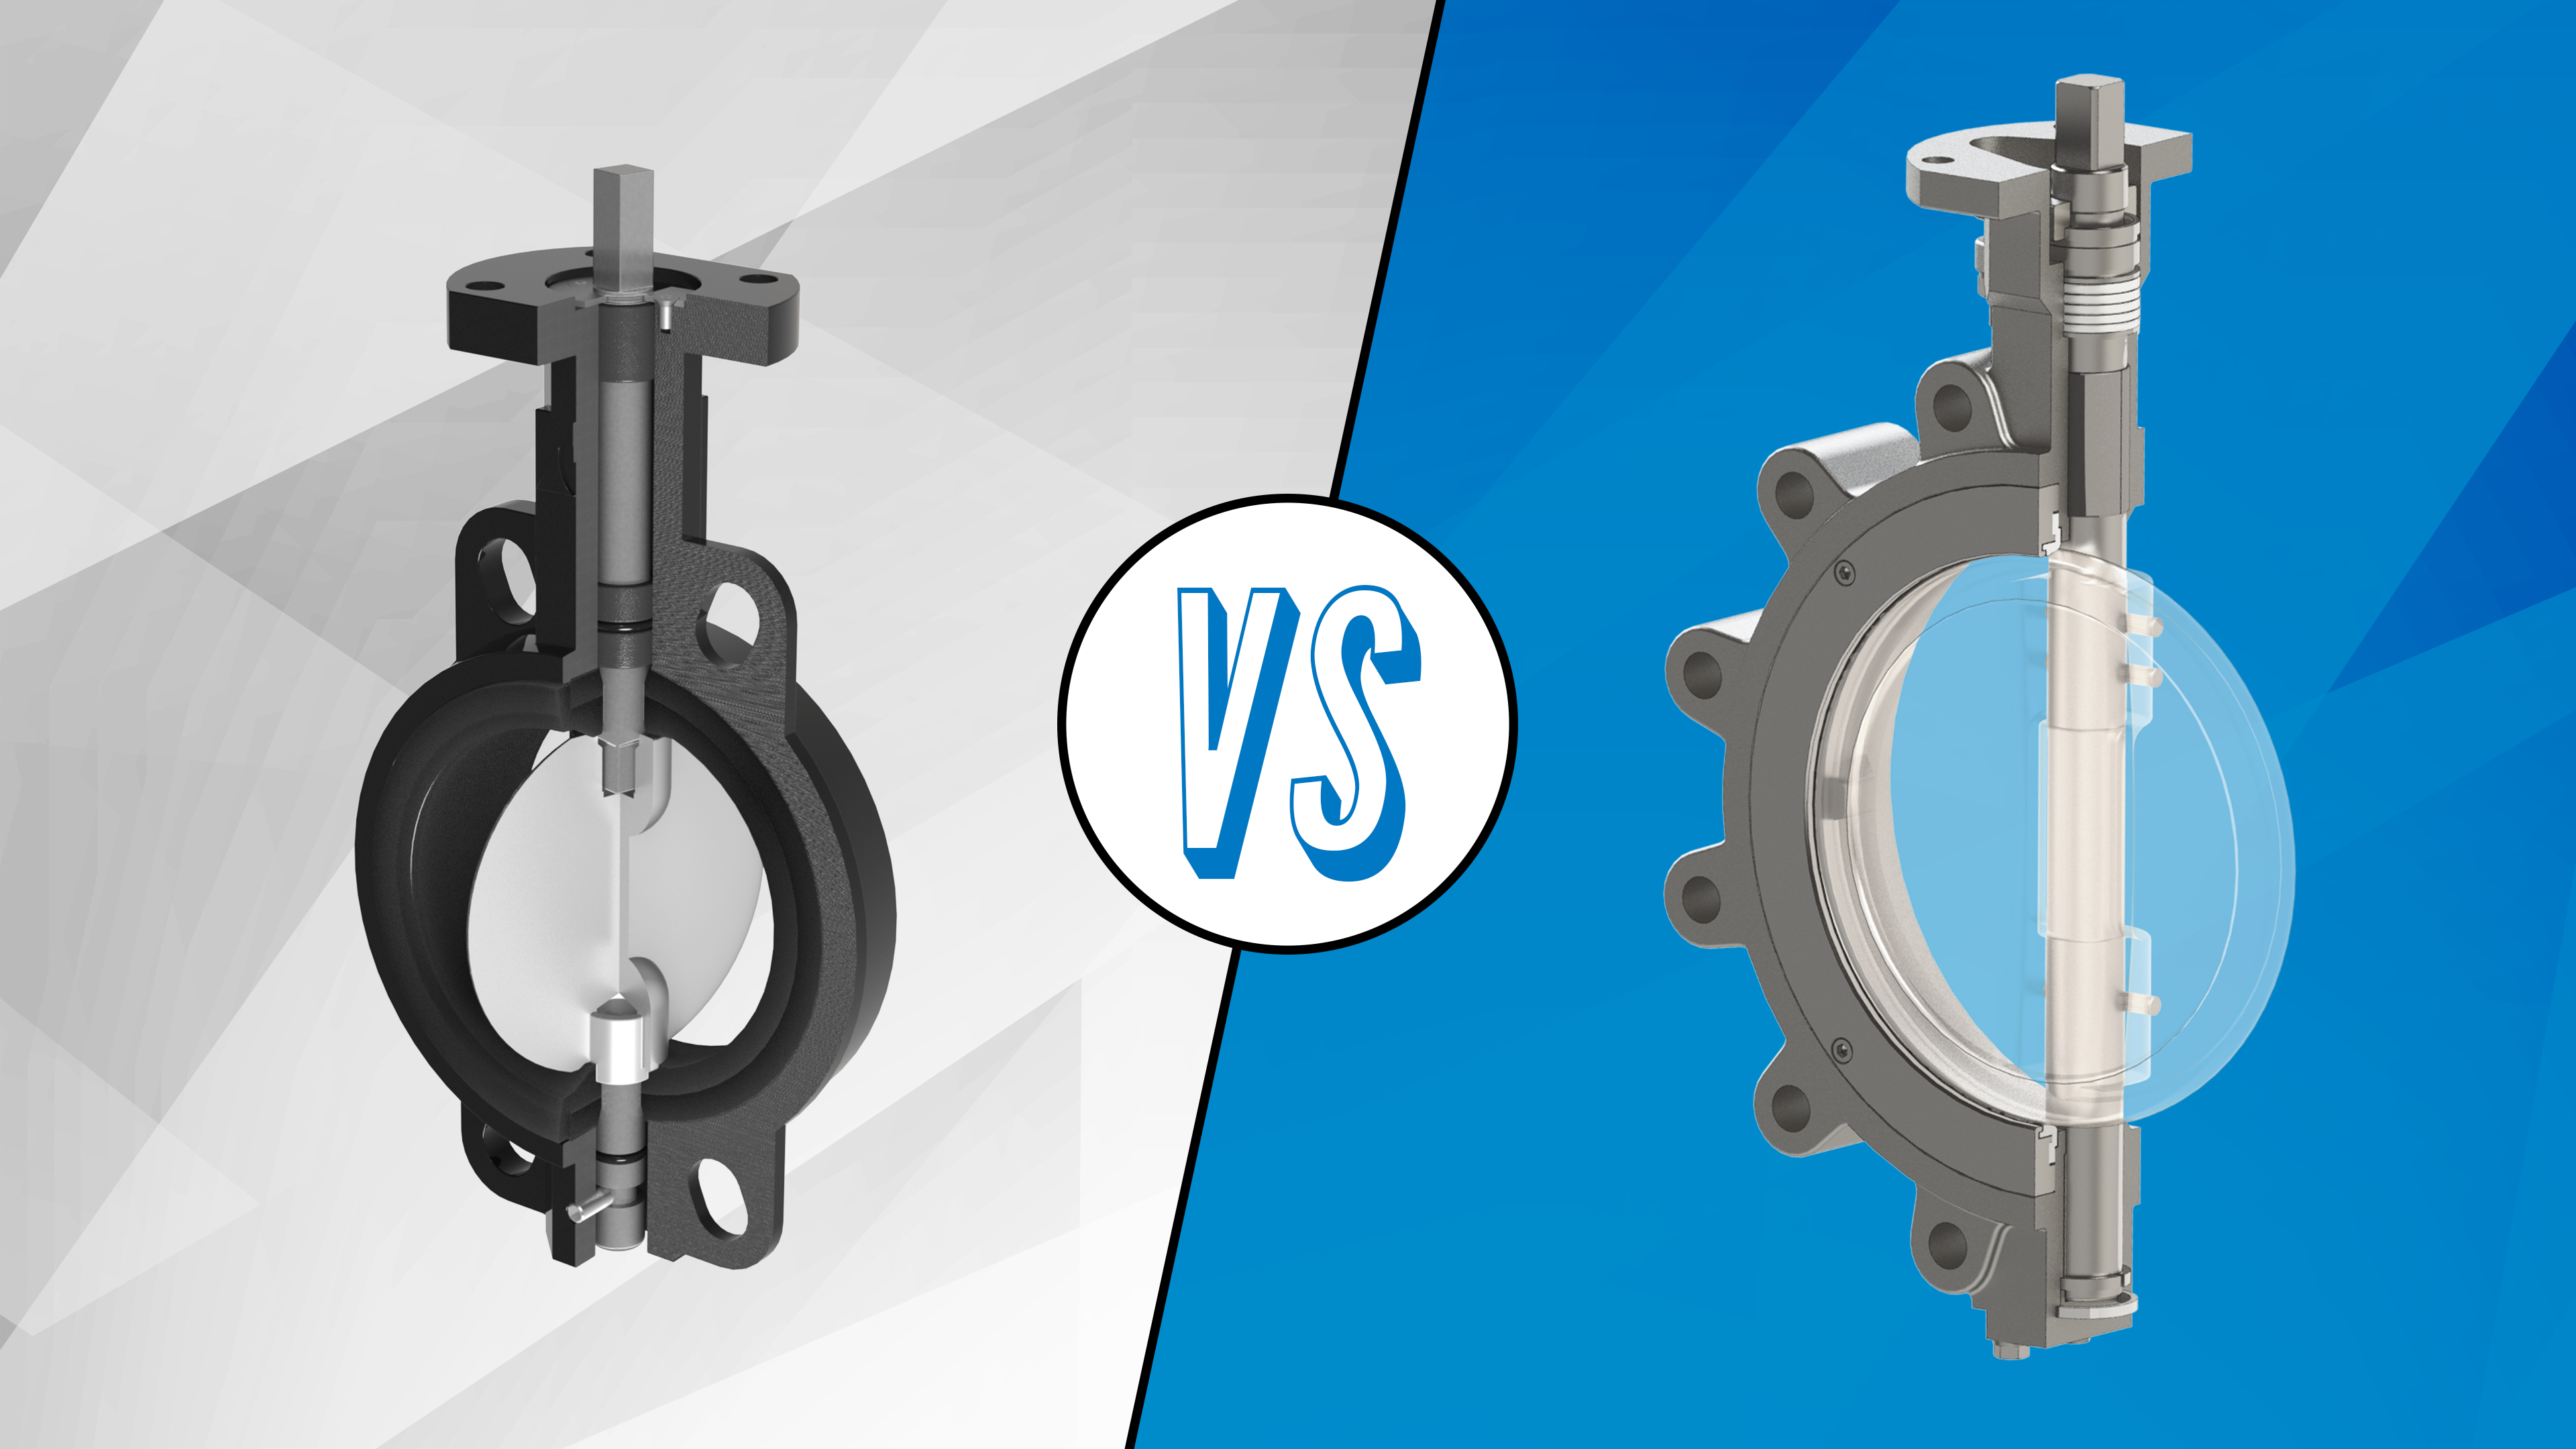 What is the Difference Between a Resilient Seated Butterfly Valve & High Performance (Double Offset) Butterfly Valve?